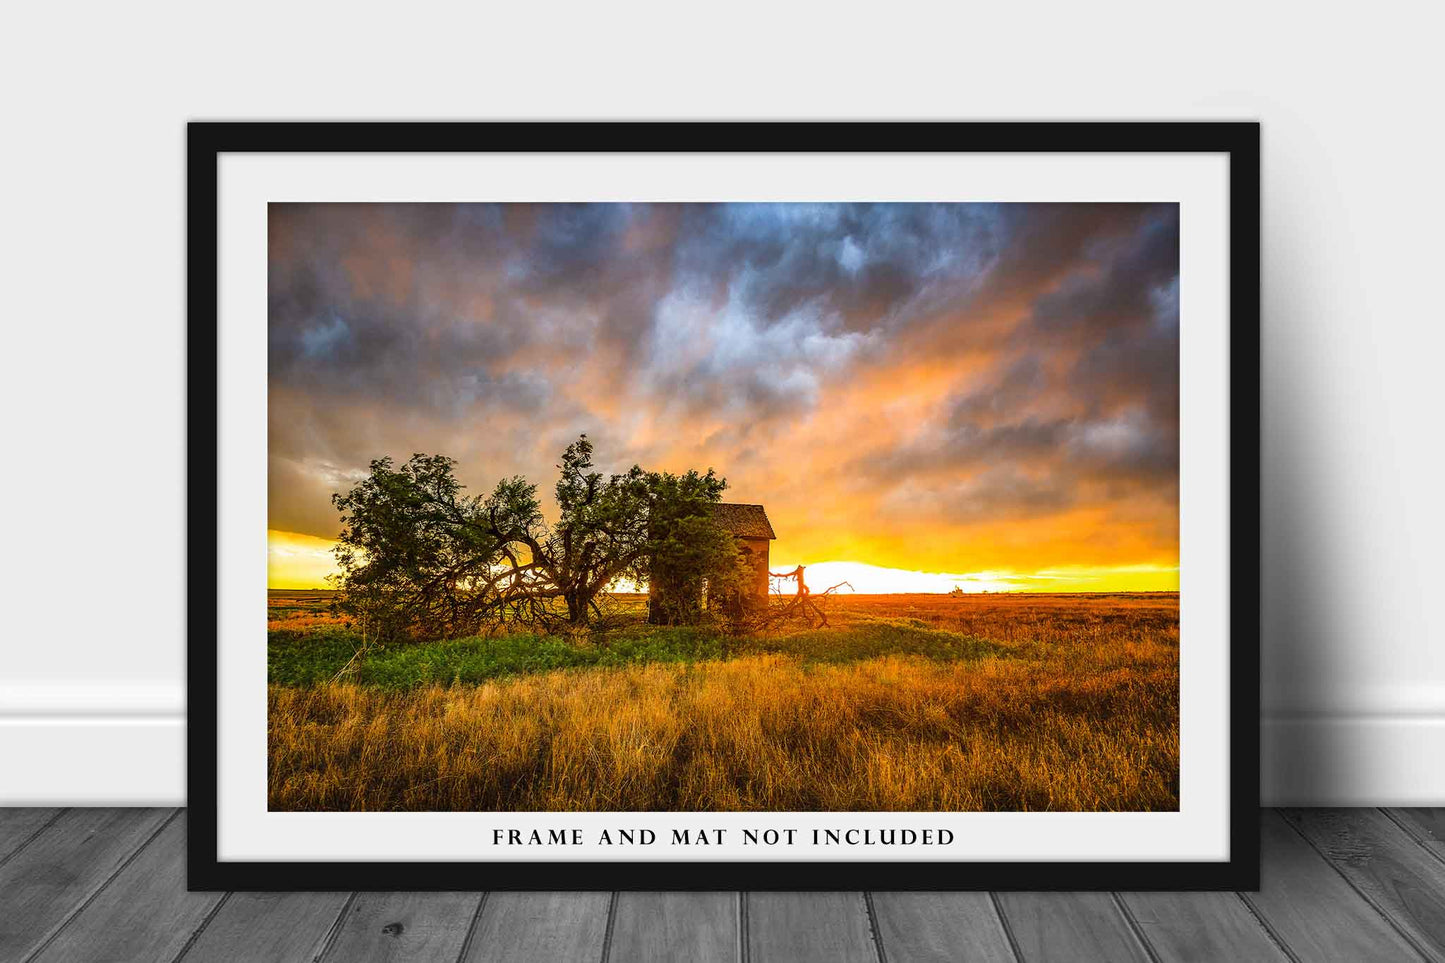 Prairie Photography Print - Wall Art Picture of Abandoned Structure and Windswept Tree Under Scenic Sunset in Oklahoma Landscape Decor